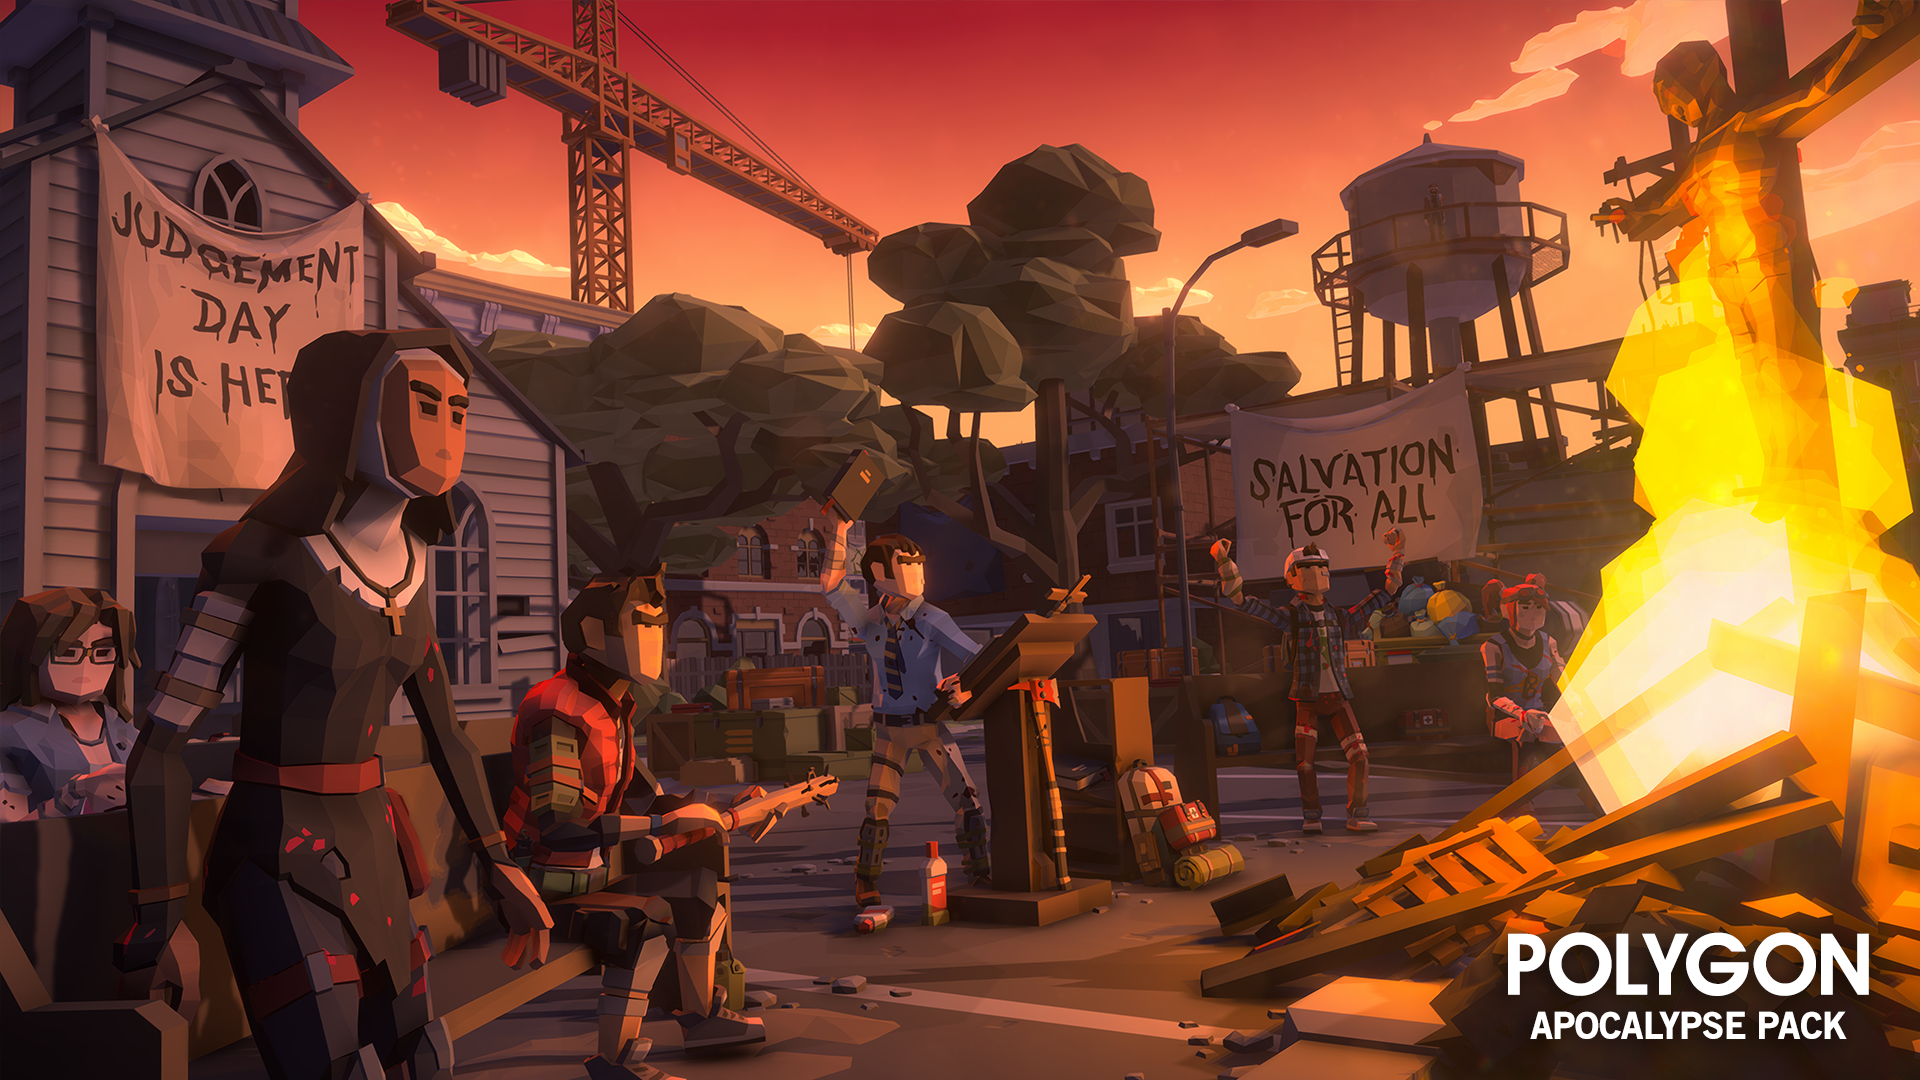 Apocalypse 3D low poly characters standing in a town square burning books and objects